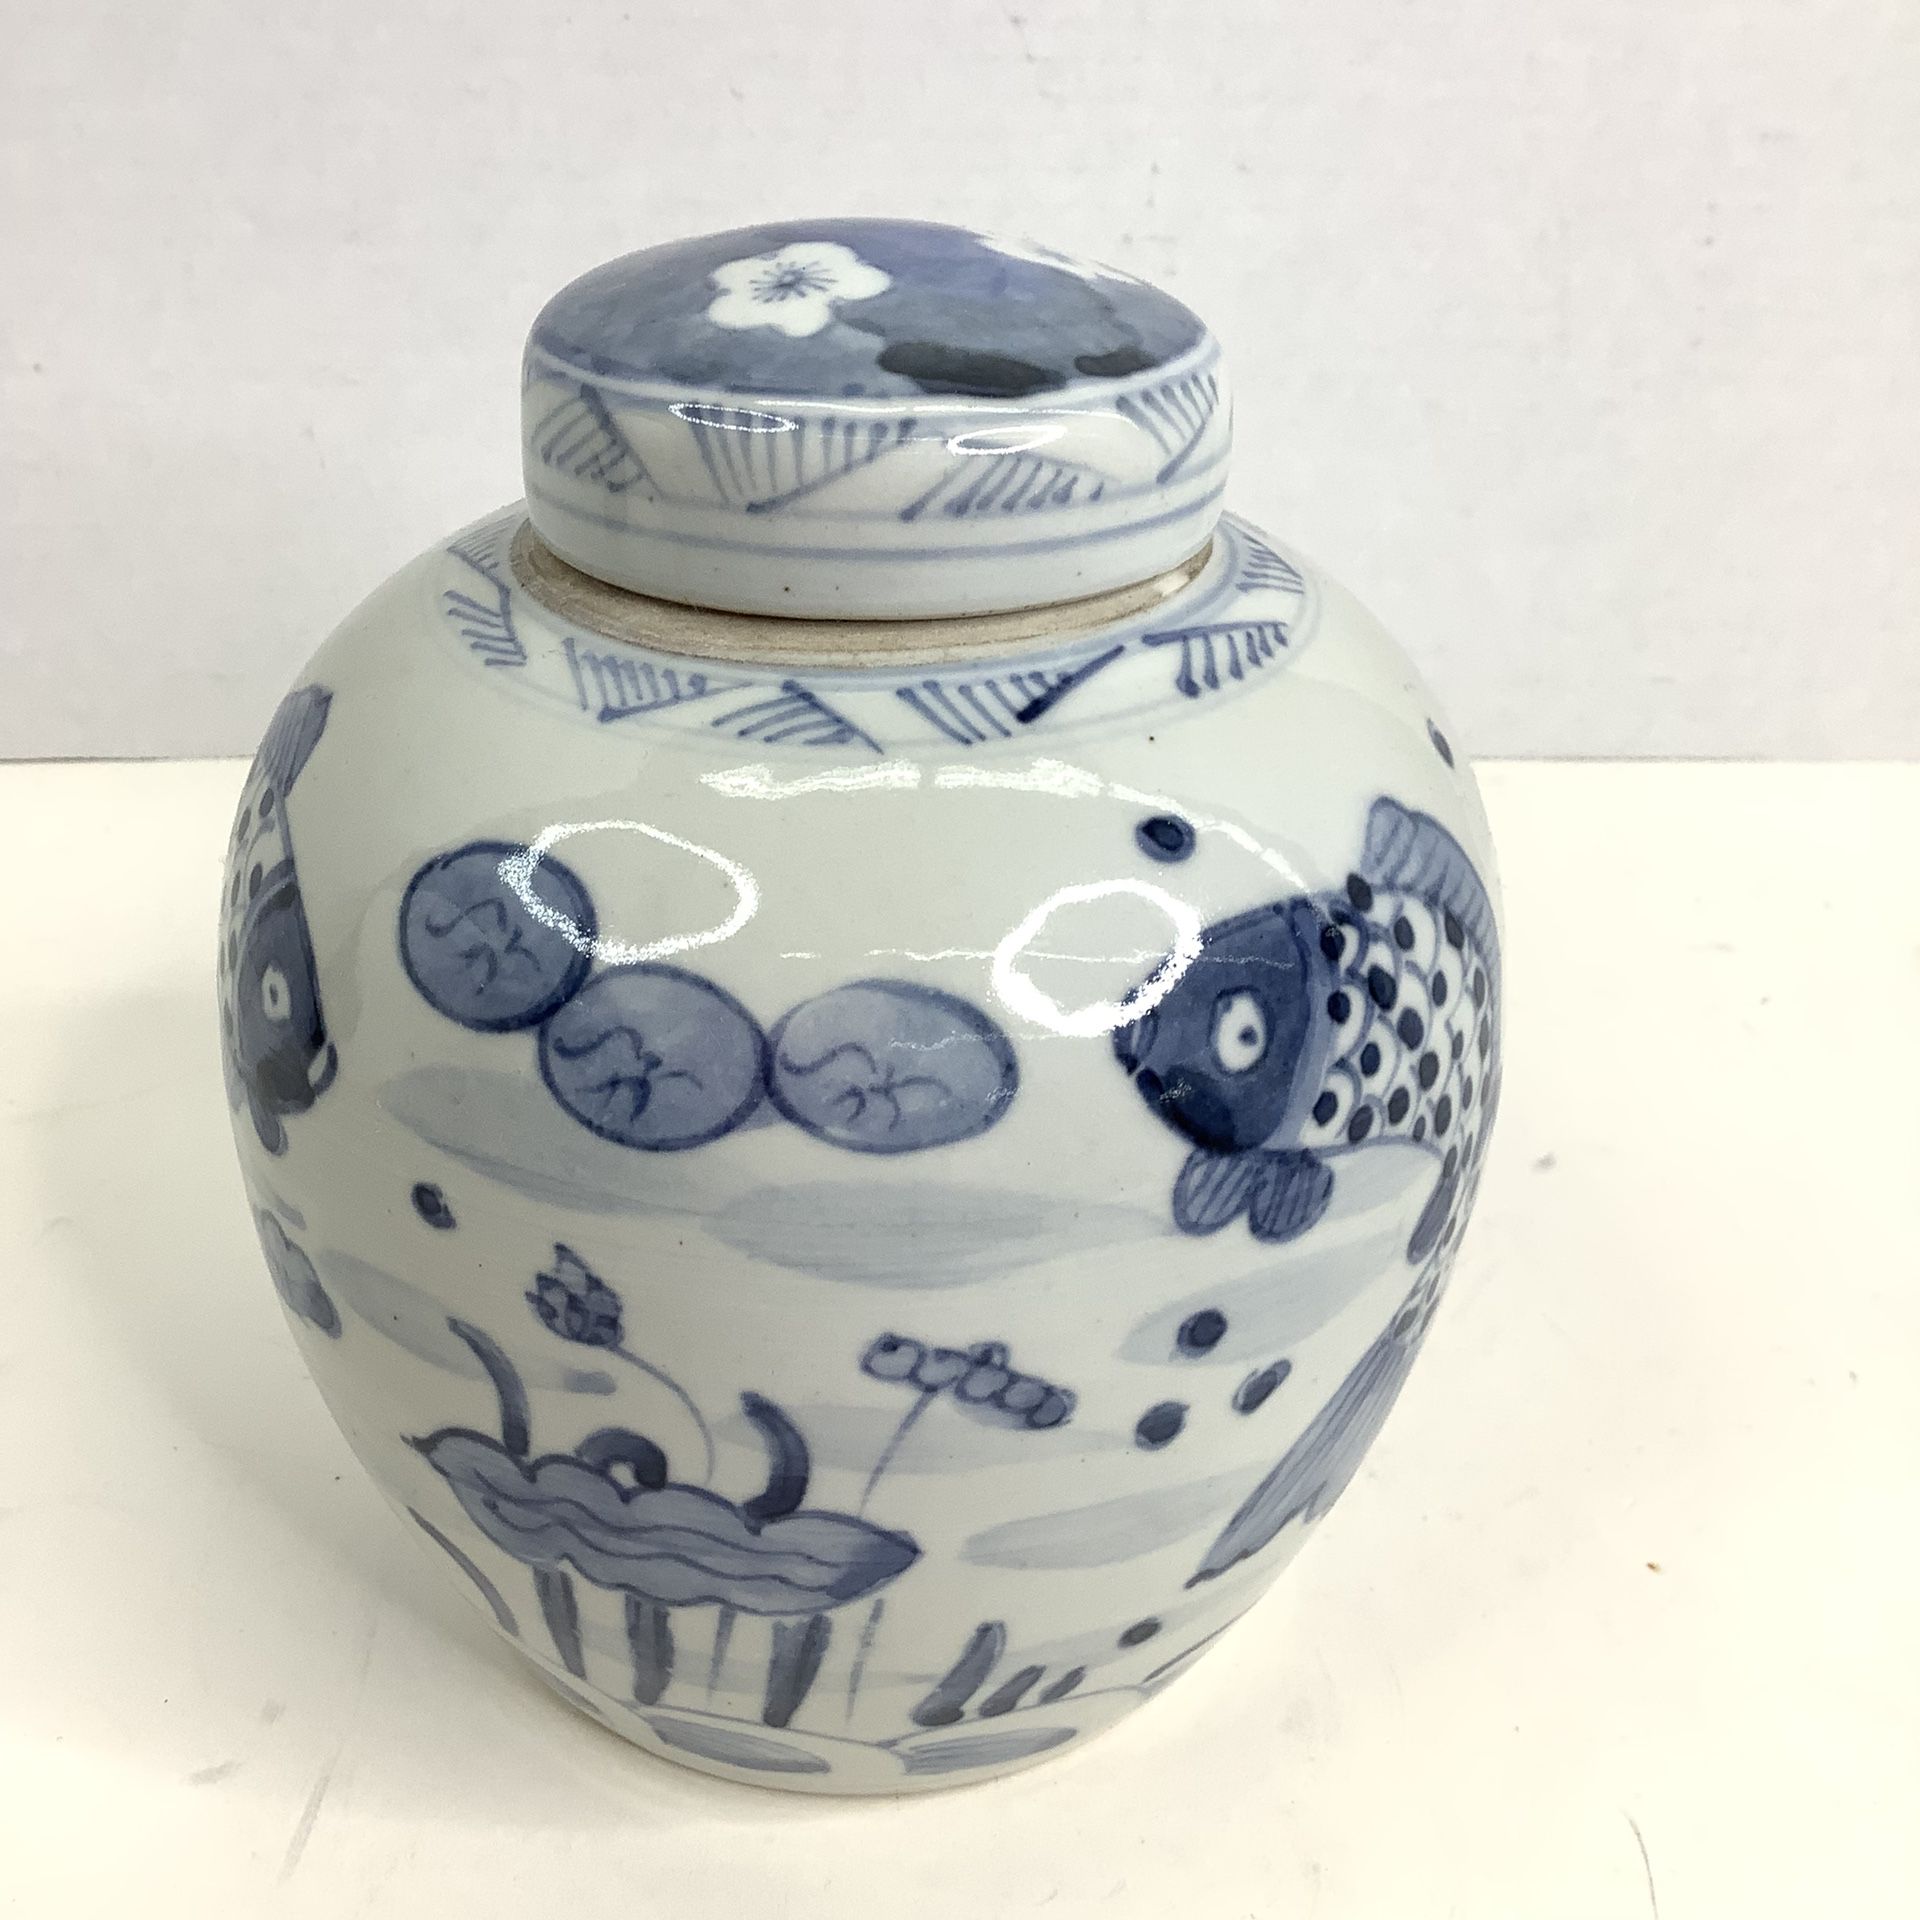 Vintage Porcelain Chinese Blue And White Ginger Jar With Lids ($30 EACH)